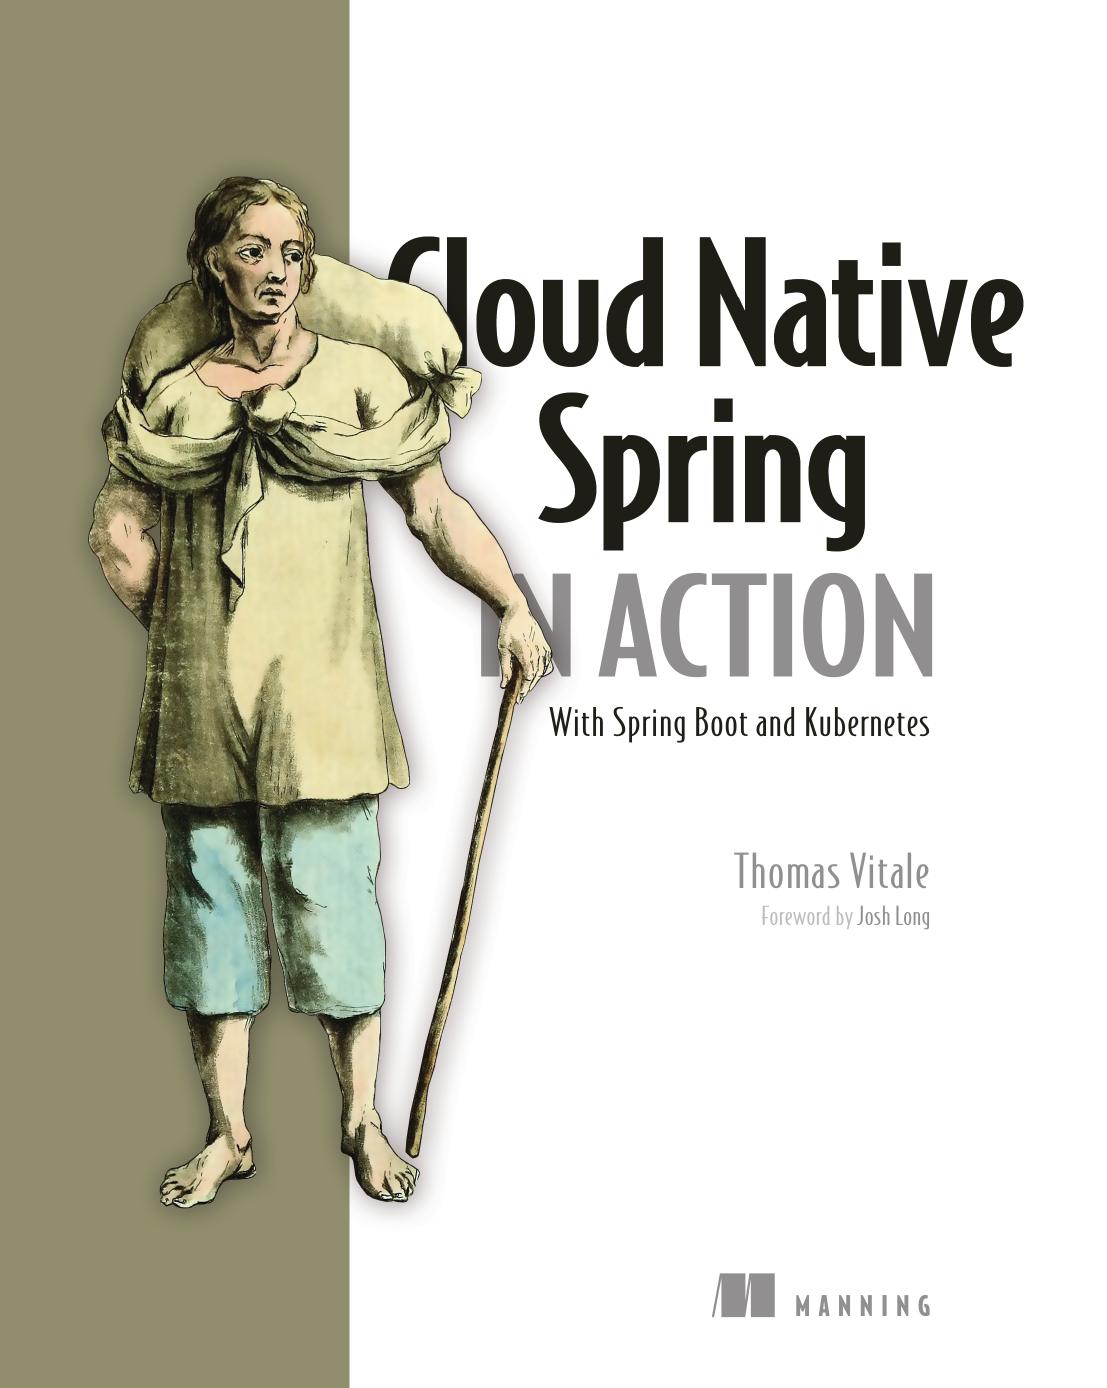 Cloud Native Spring in Action: With Spring Boot and Kubernetes by Thomas Vitale